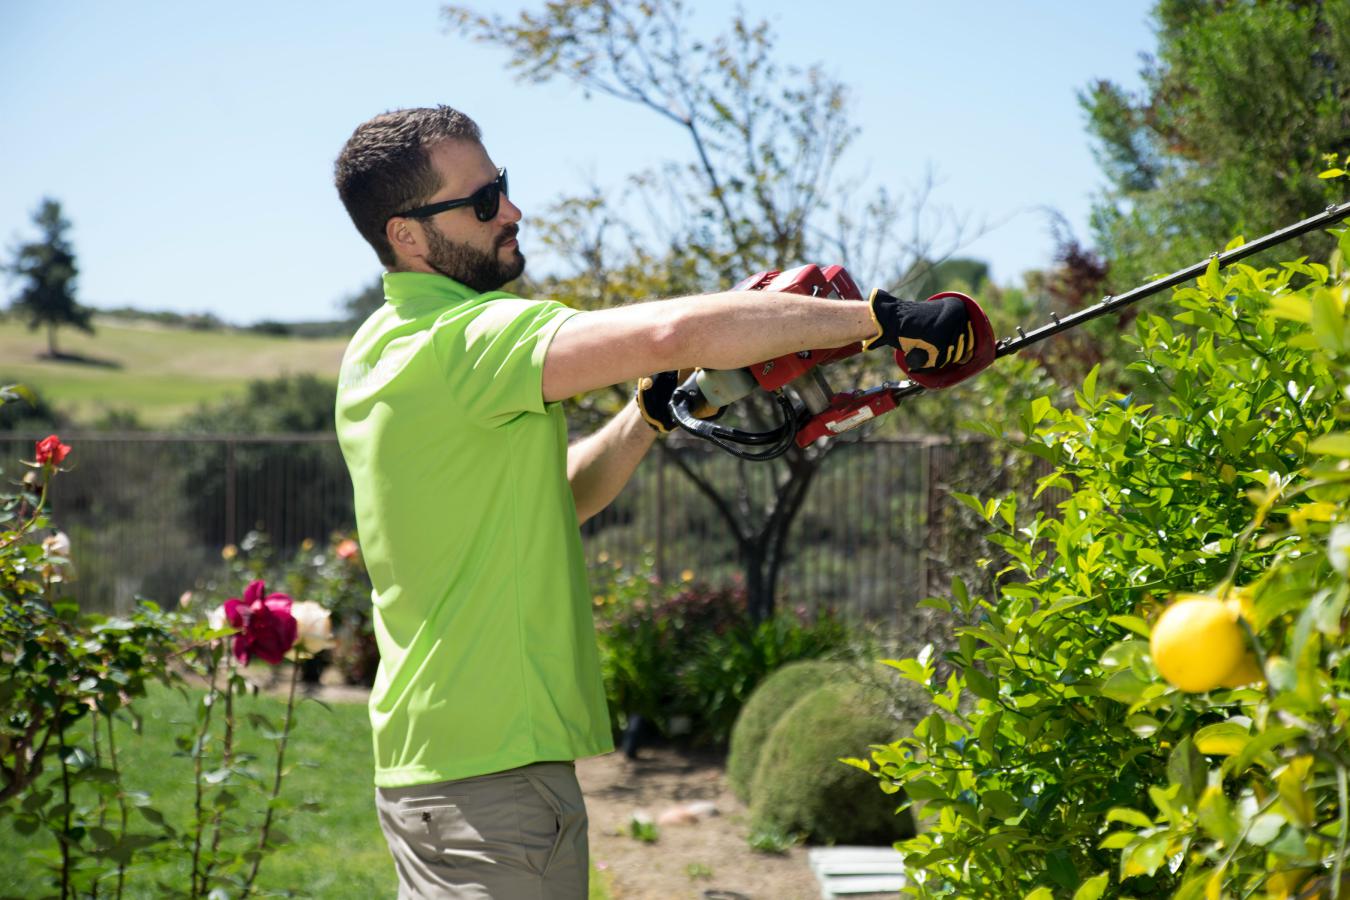 Improved life of lawn pros through smartly leveraged technology